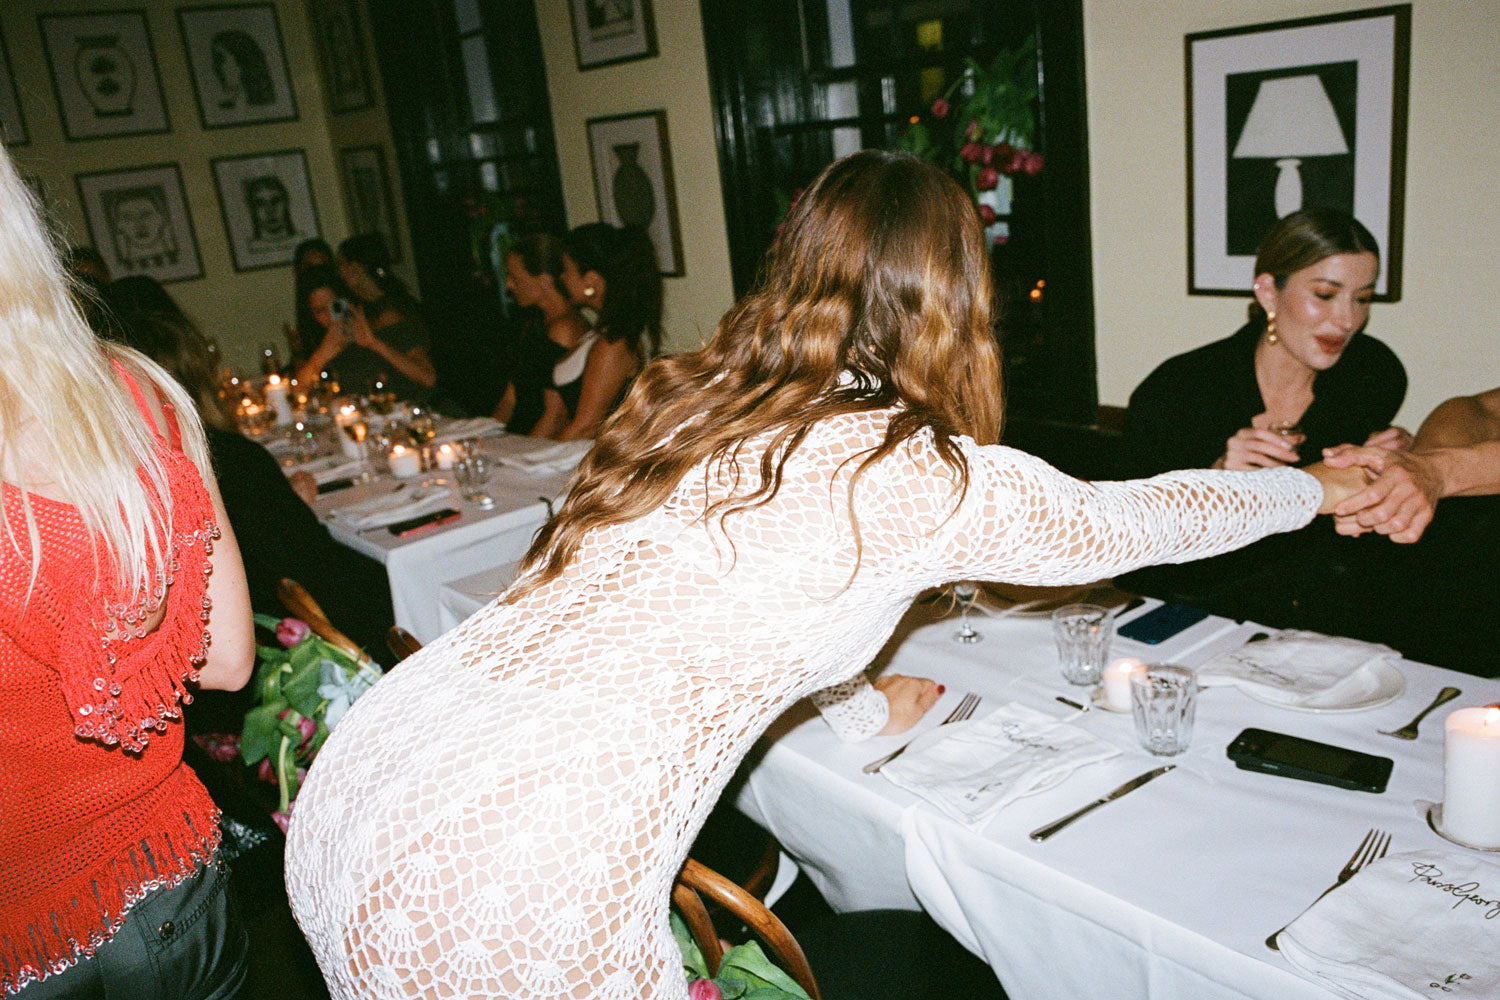 A female figure leaning over a restaurant table to shake hands wearing the White 09 Crochet Dress